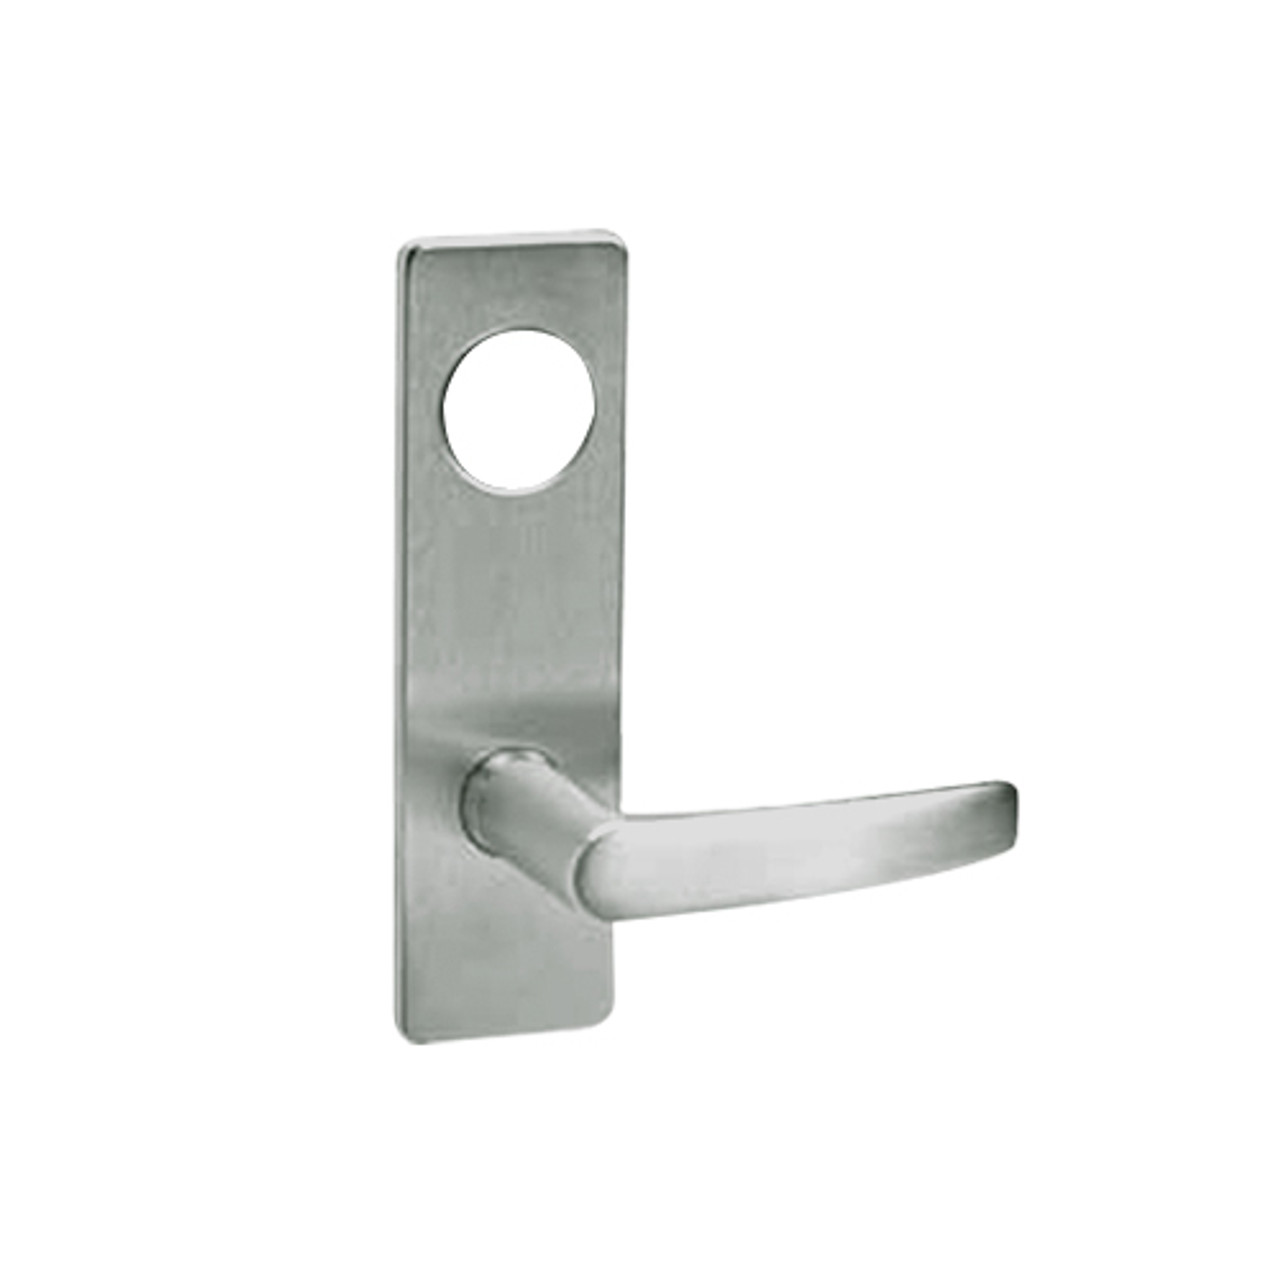 ML2024-ASR-619-LC Corbin Russwin ML2000 Series Mortise Entrance Locksets with Armstrong Lever in Satin Nickel